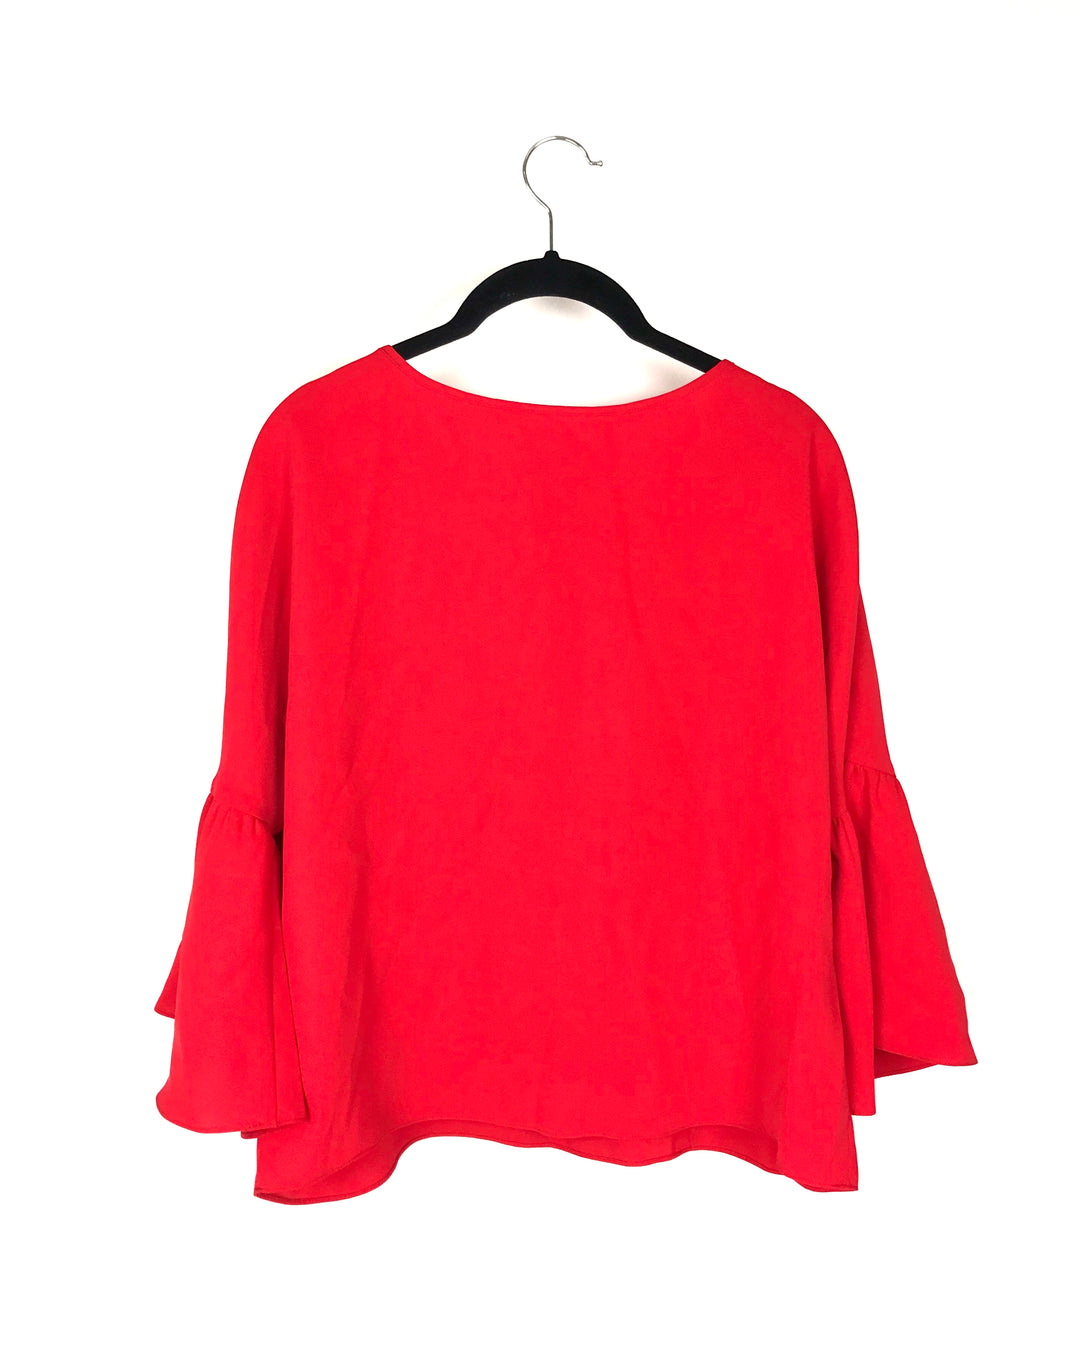 Bright Red Top - Small